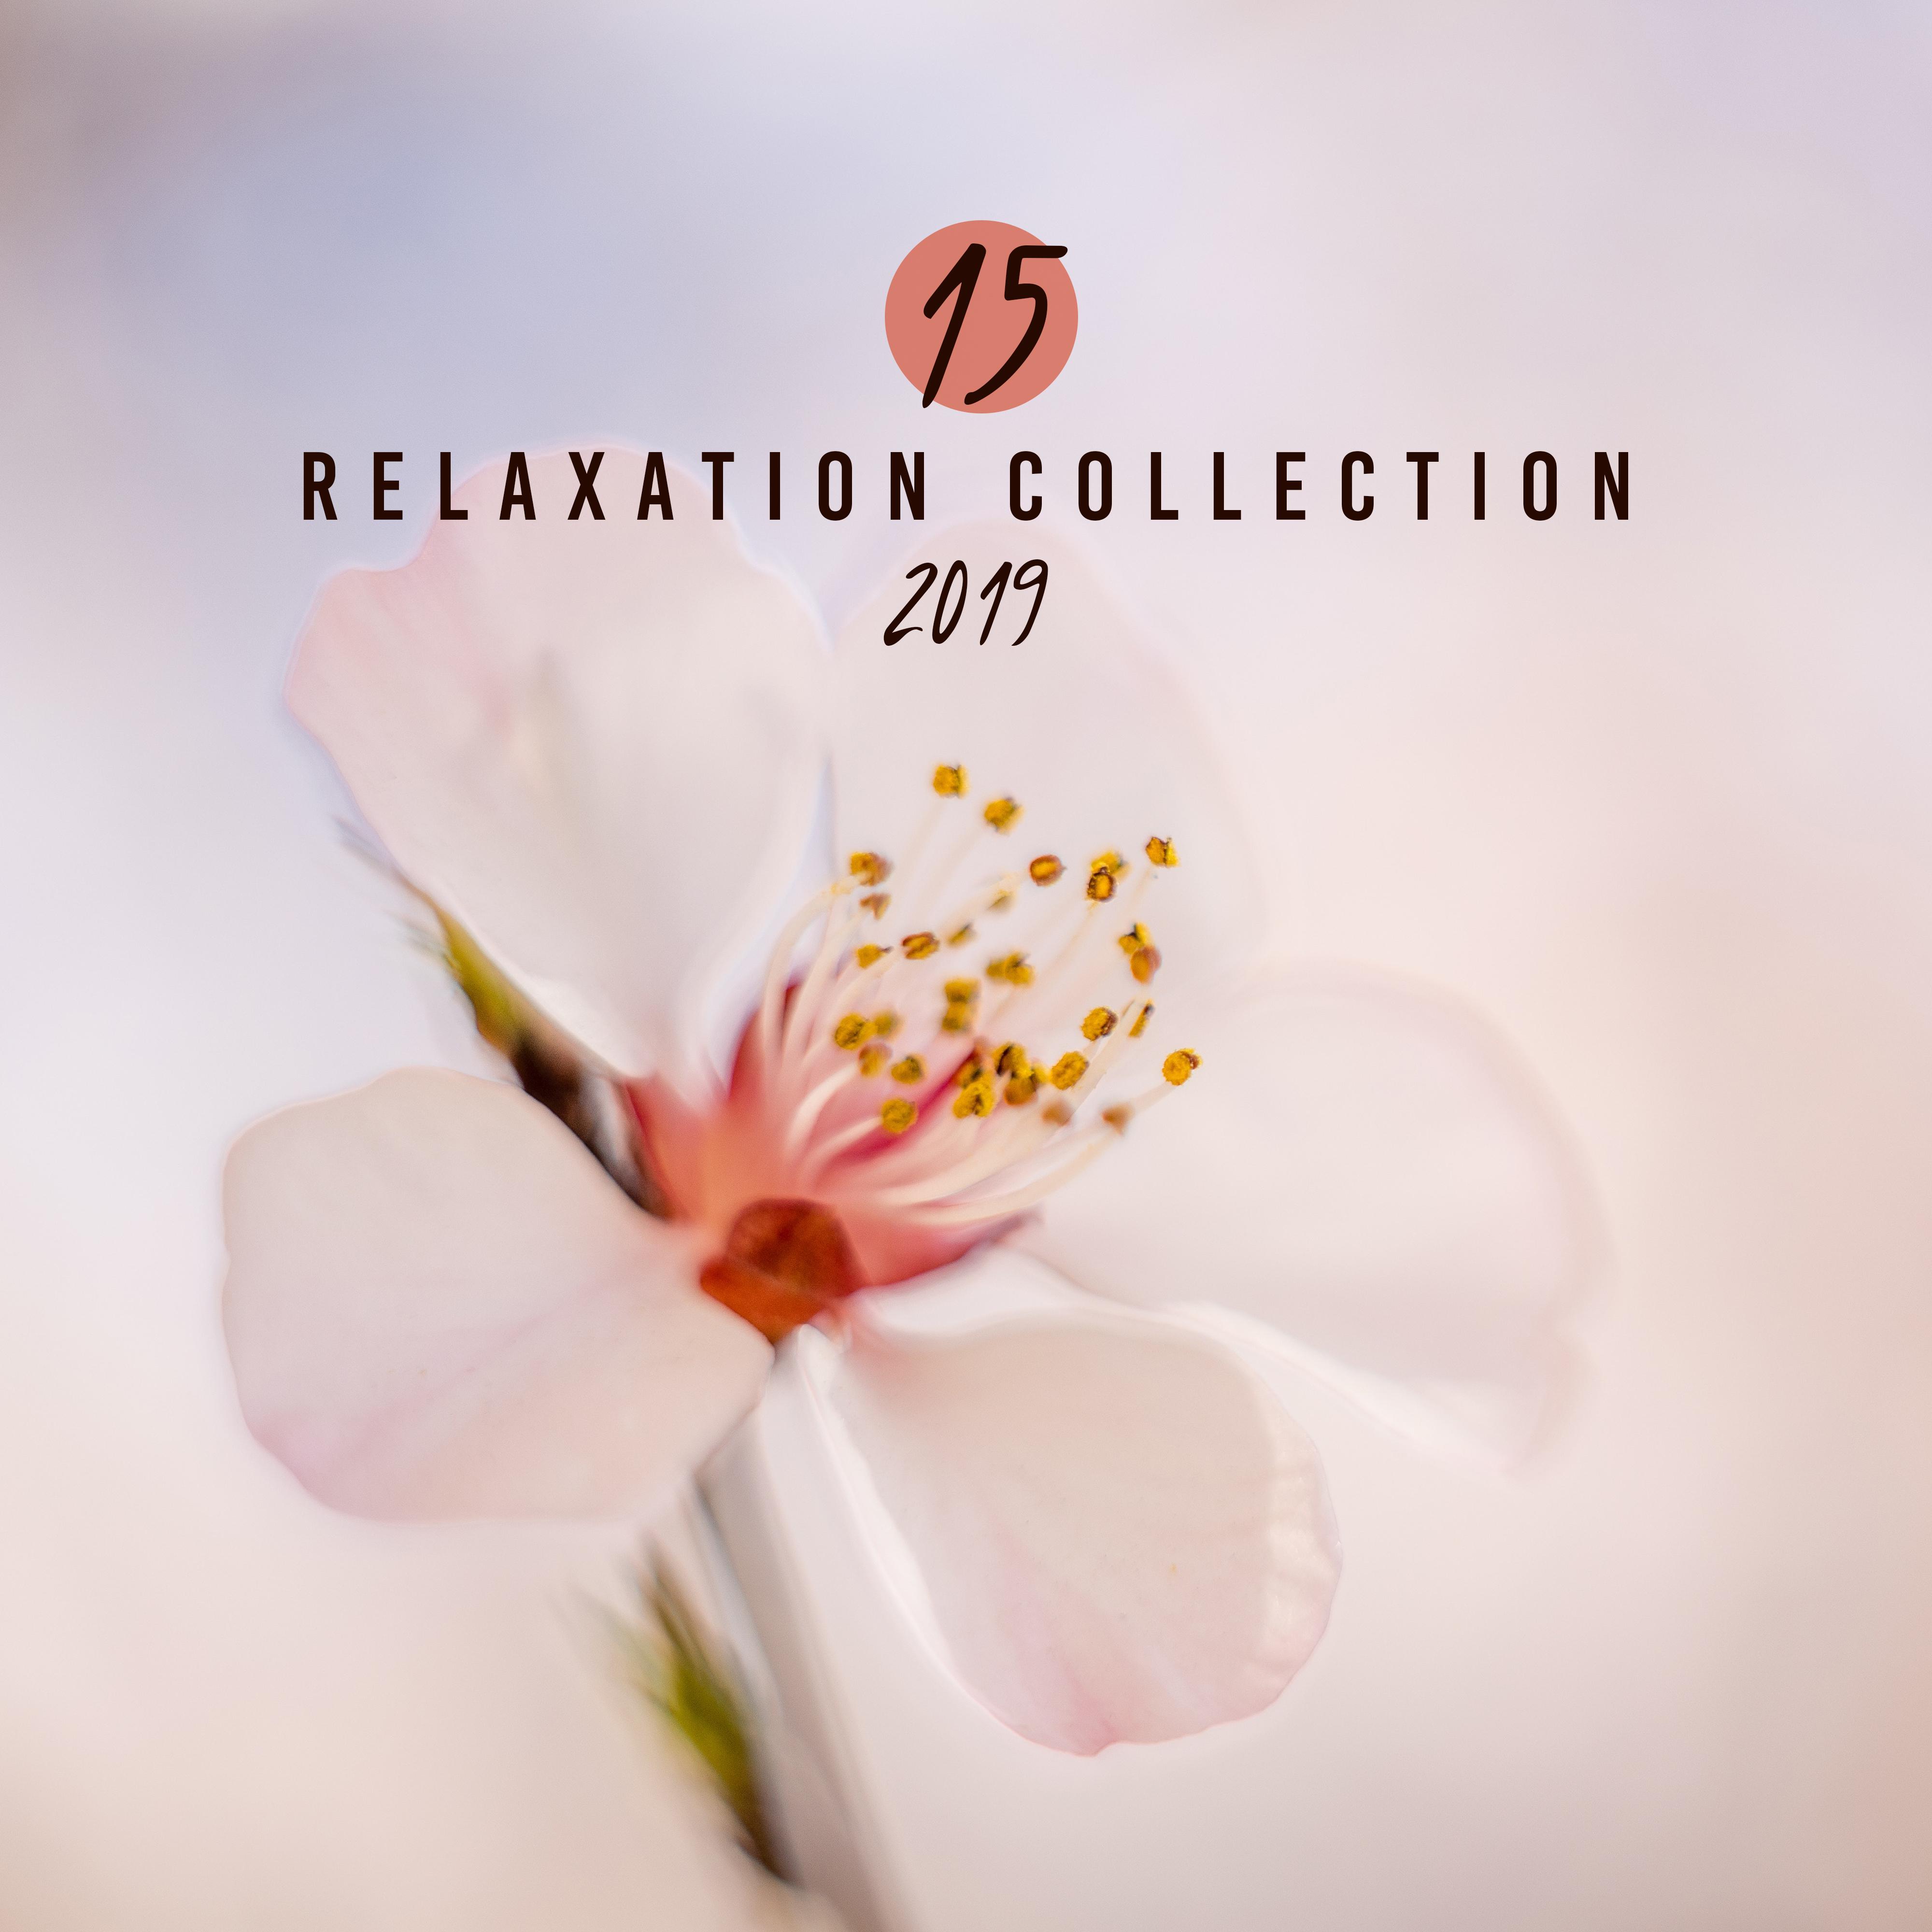 15 Relaxation Collection 2019: Sounds of Nature for Rest, Relax, Sleep, Spa & Wellness, Meditation, Zen Lounge, Inner Harmony, Nature Music, Deep Relaxation